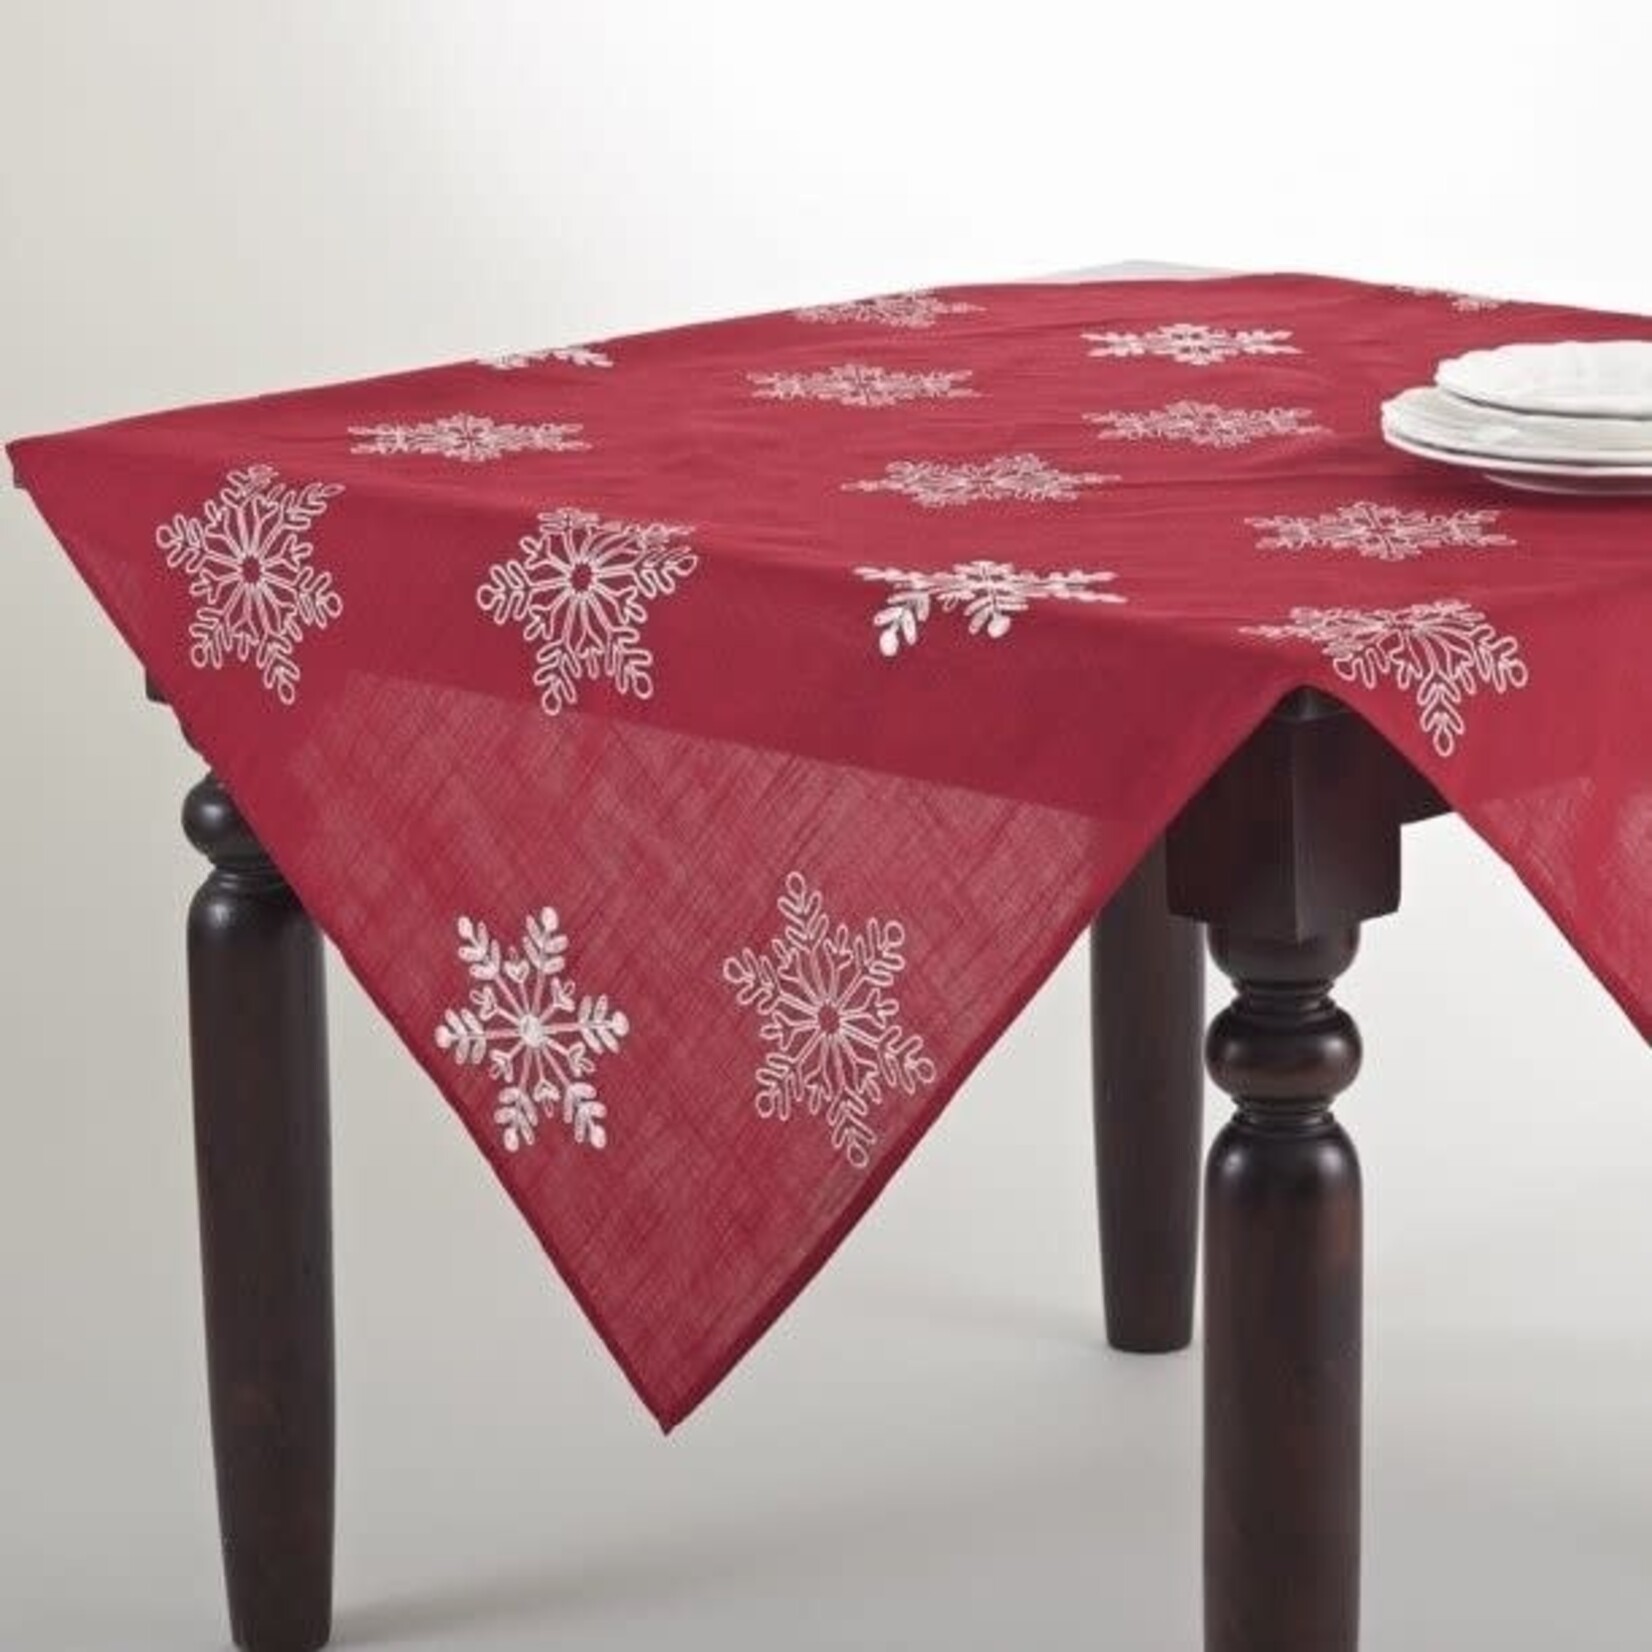 Saro Trading Company Red Snow Crystal Tablecloth Topper